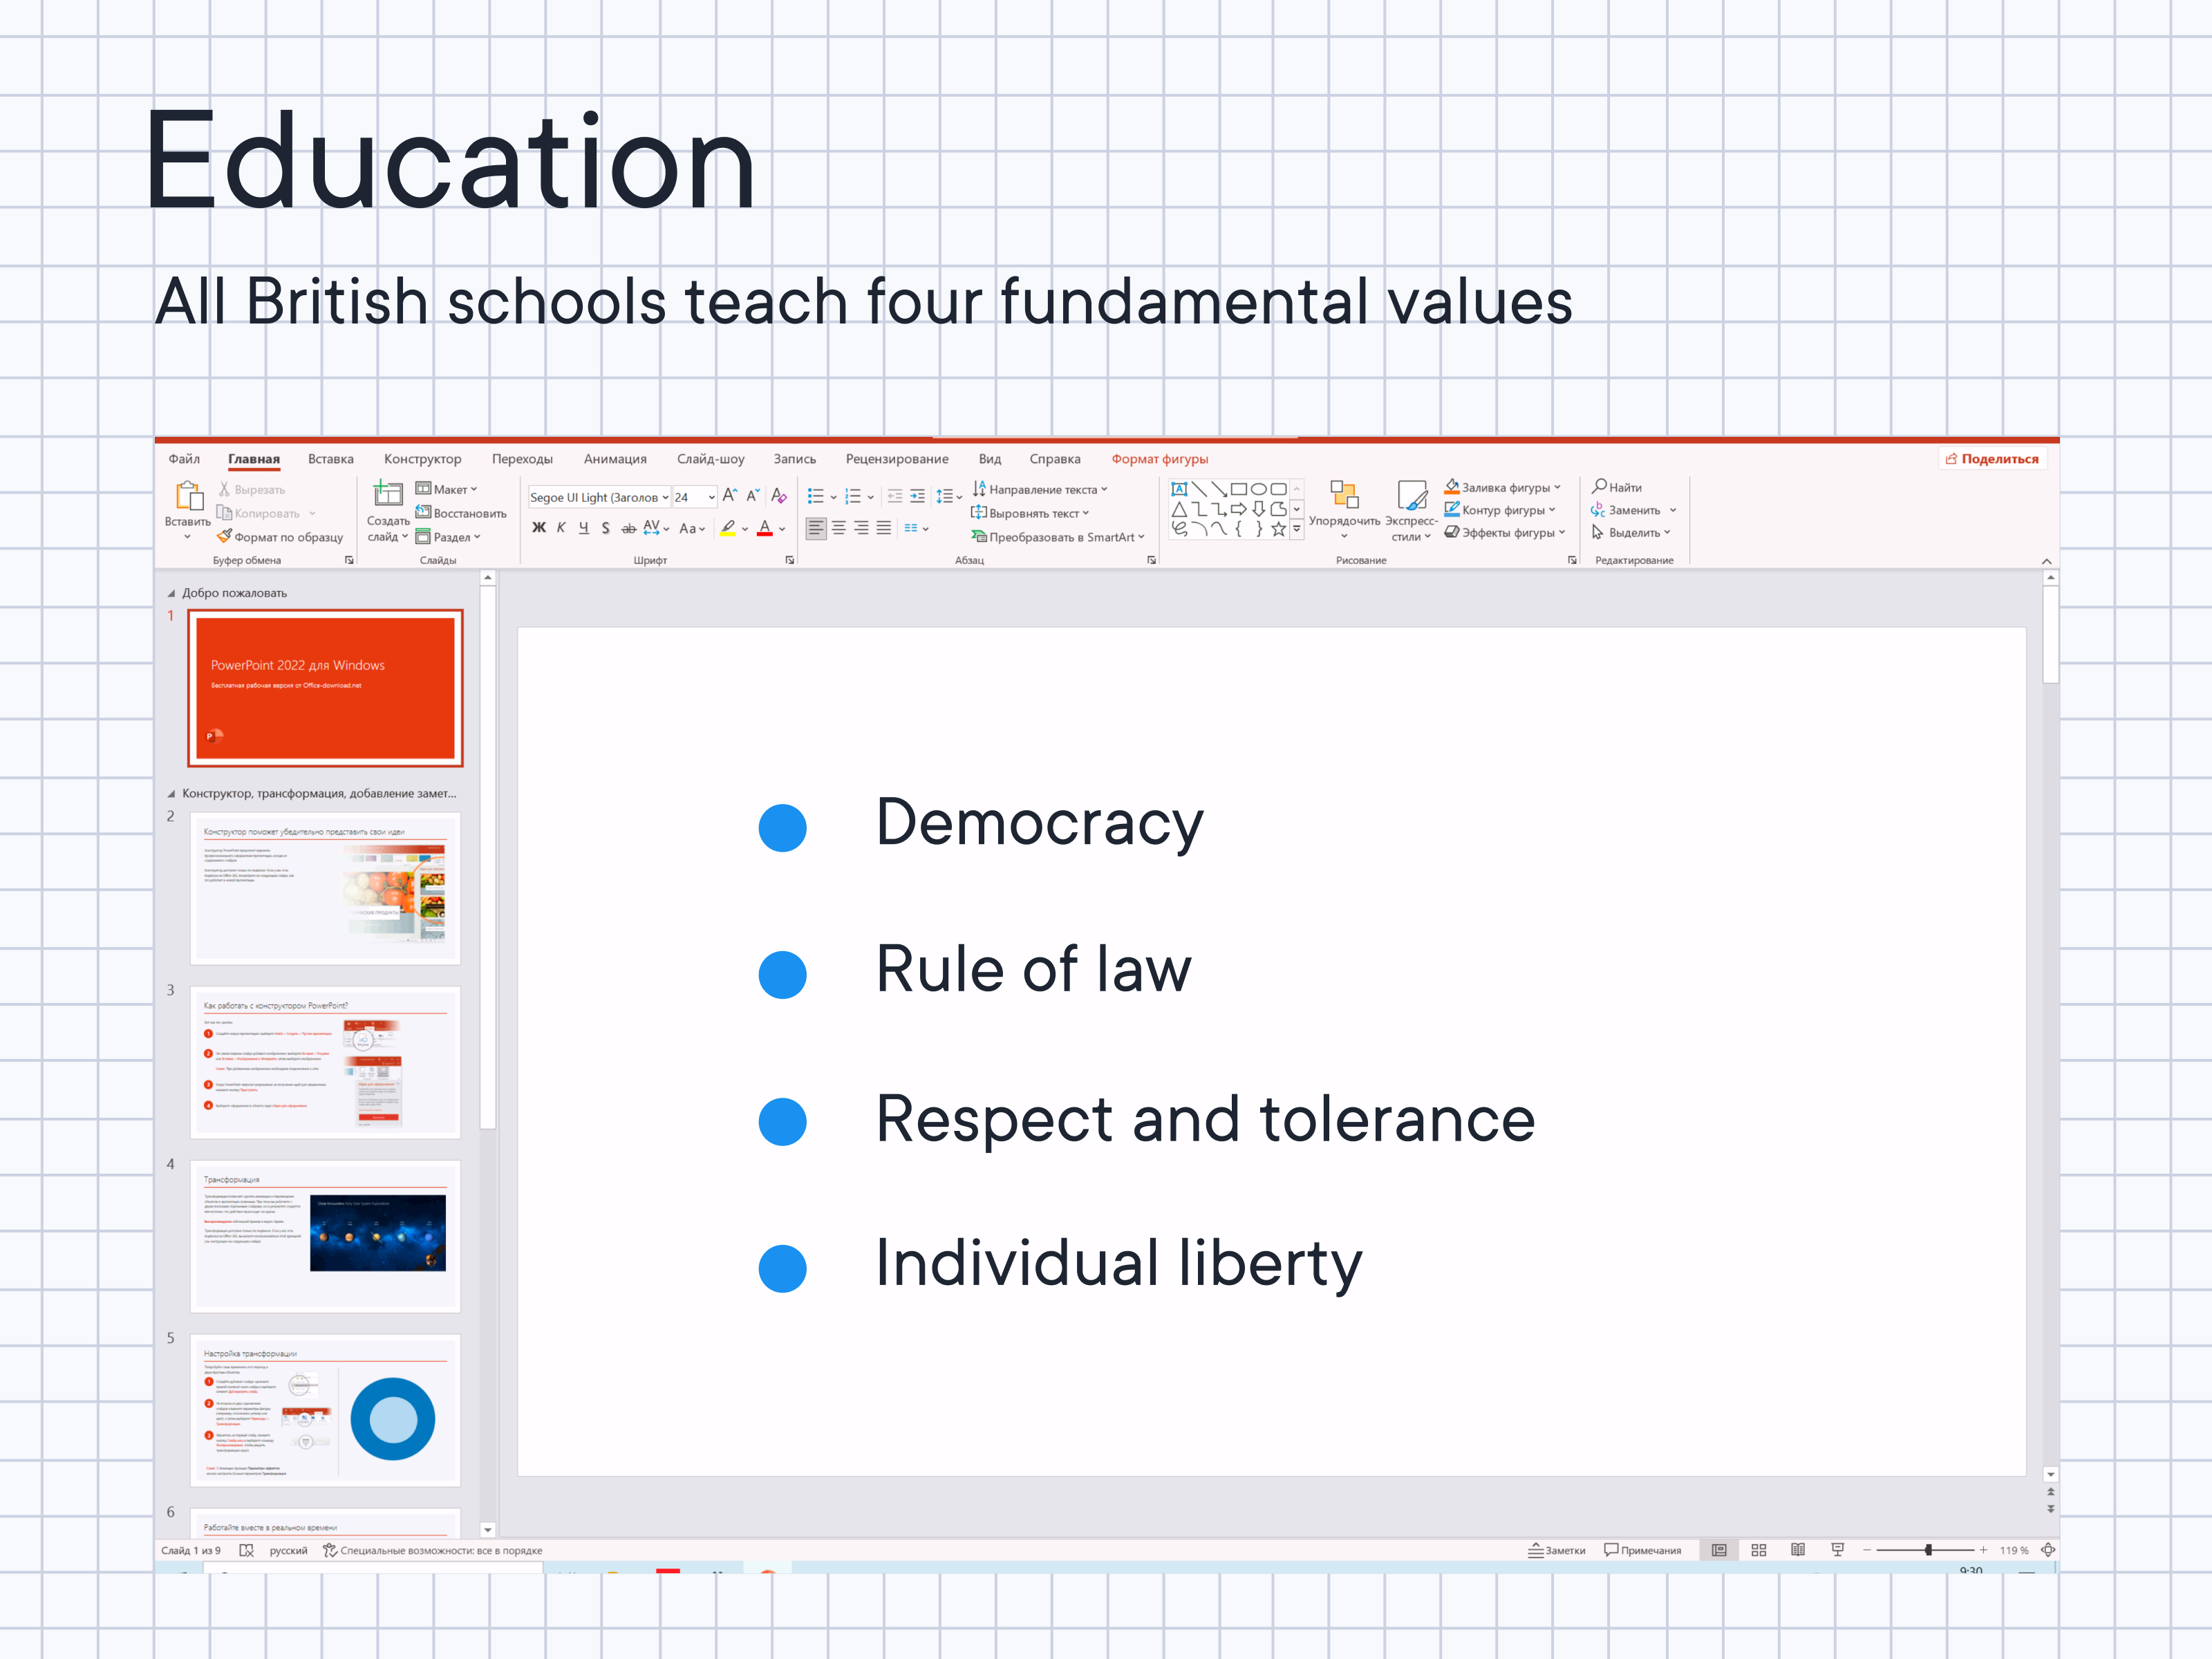 The four fundamental values of all British schools are democracy, rule of law, respect and tolerance and individual liberty.